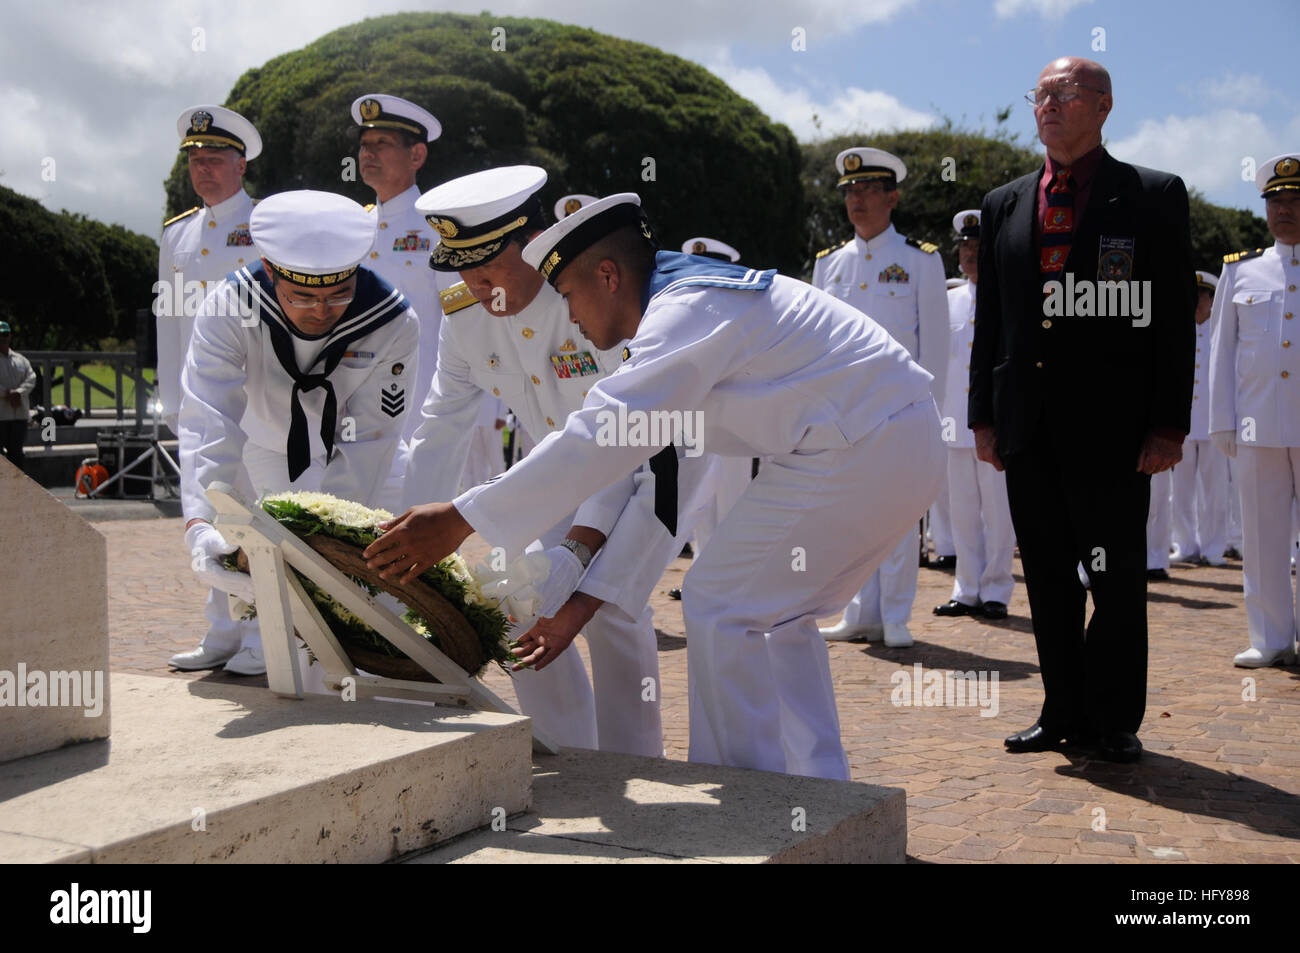 100609-N-7498L-193 HONOLULU (June 9, 2010) Japan Maritime Self-Defense Force Rear Adm. Tomohisa Takei lays a wreath at the National Memorial Cemetery of the Pacific at the Puowaina Crater. The Japan Maritime Self-Defense Force Training Squadron arrived at Joint Base Pearl Harbor-Hickam to participate in various professional exchanges and social events with U.S. counterparts. This year marks the 50th anniversary of the U.S. and Japan Treaty of Mutual Cooperation of Security that in 1960 established the alliance between the two countries. (U.S. Navy photo by Mass Communication Specialist 2nd Cla Stock Photo